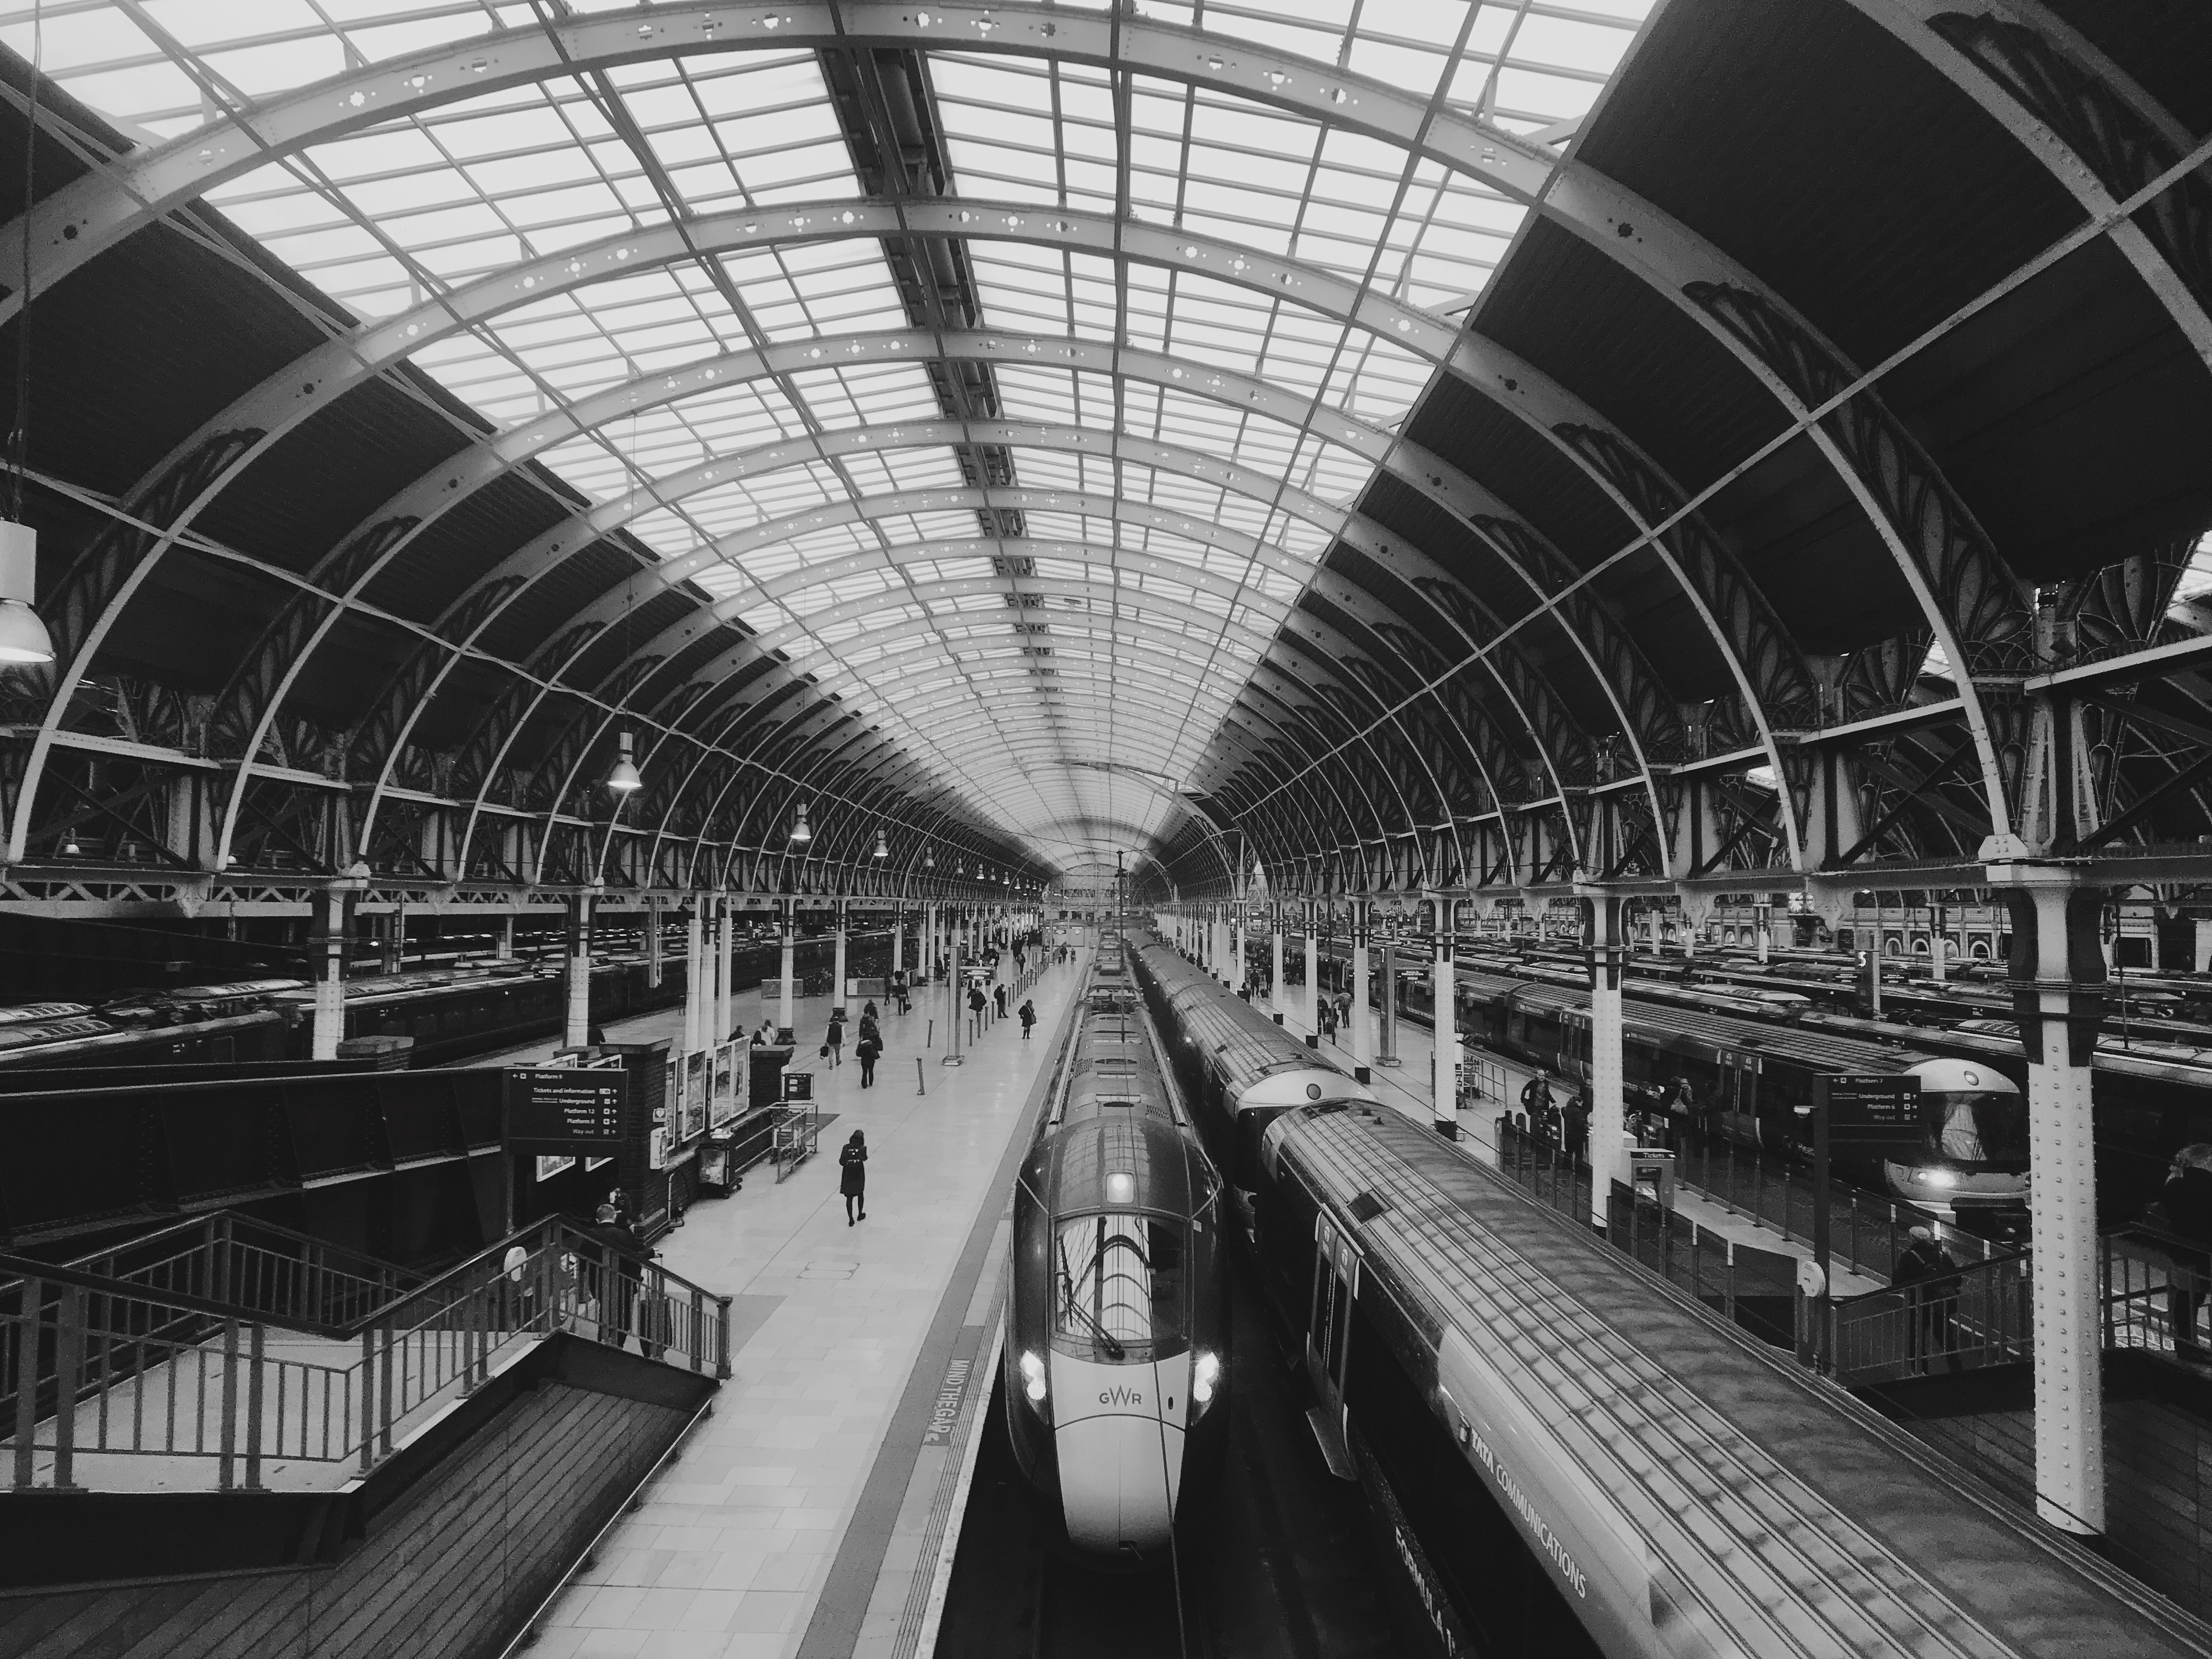 A train waiting under the curved roof in Paddington railway station